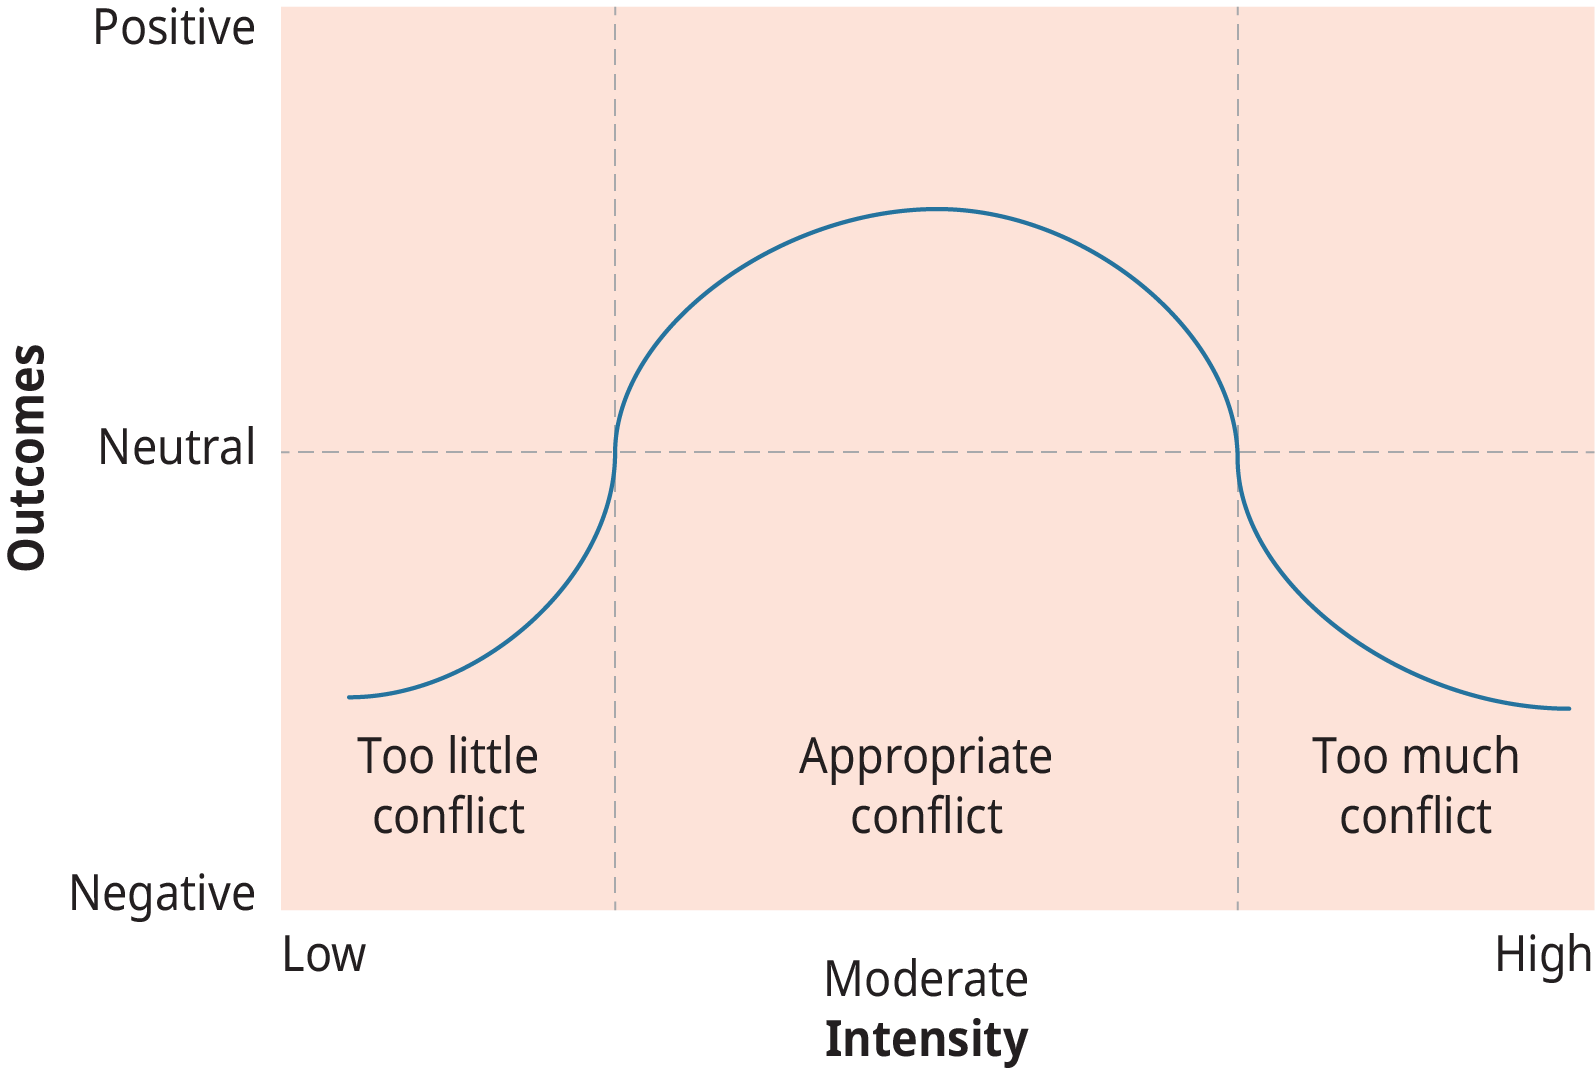 A graph representing the intensity of conflict and outcomes. The center of the graph has the highest positive outcome, indicating the benefits of moderate conflict.